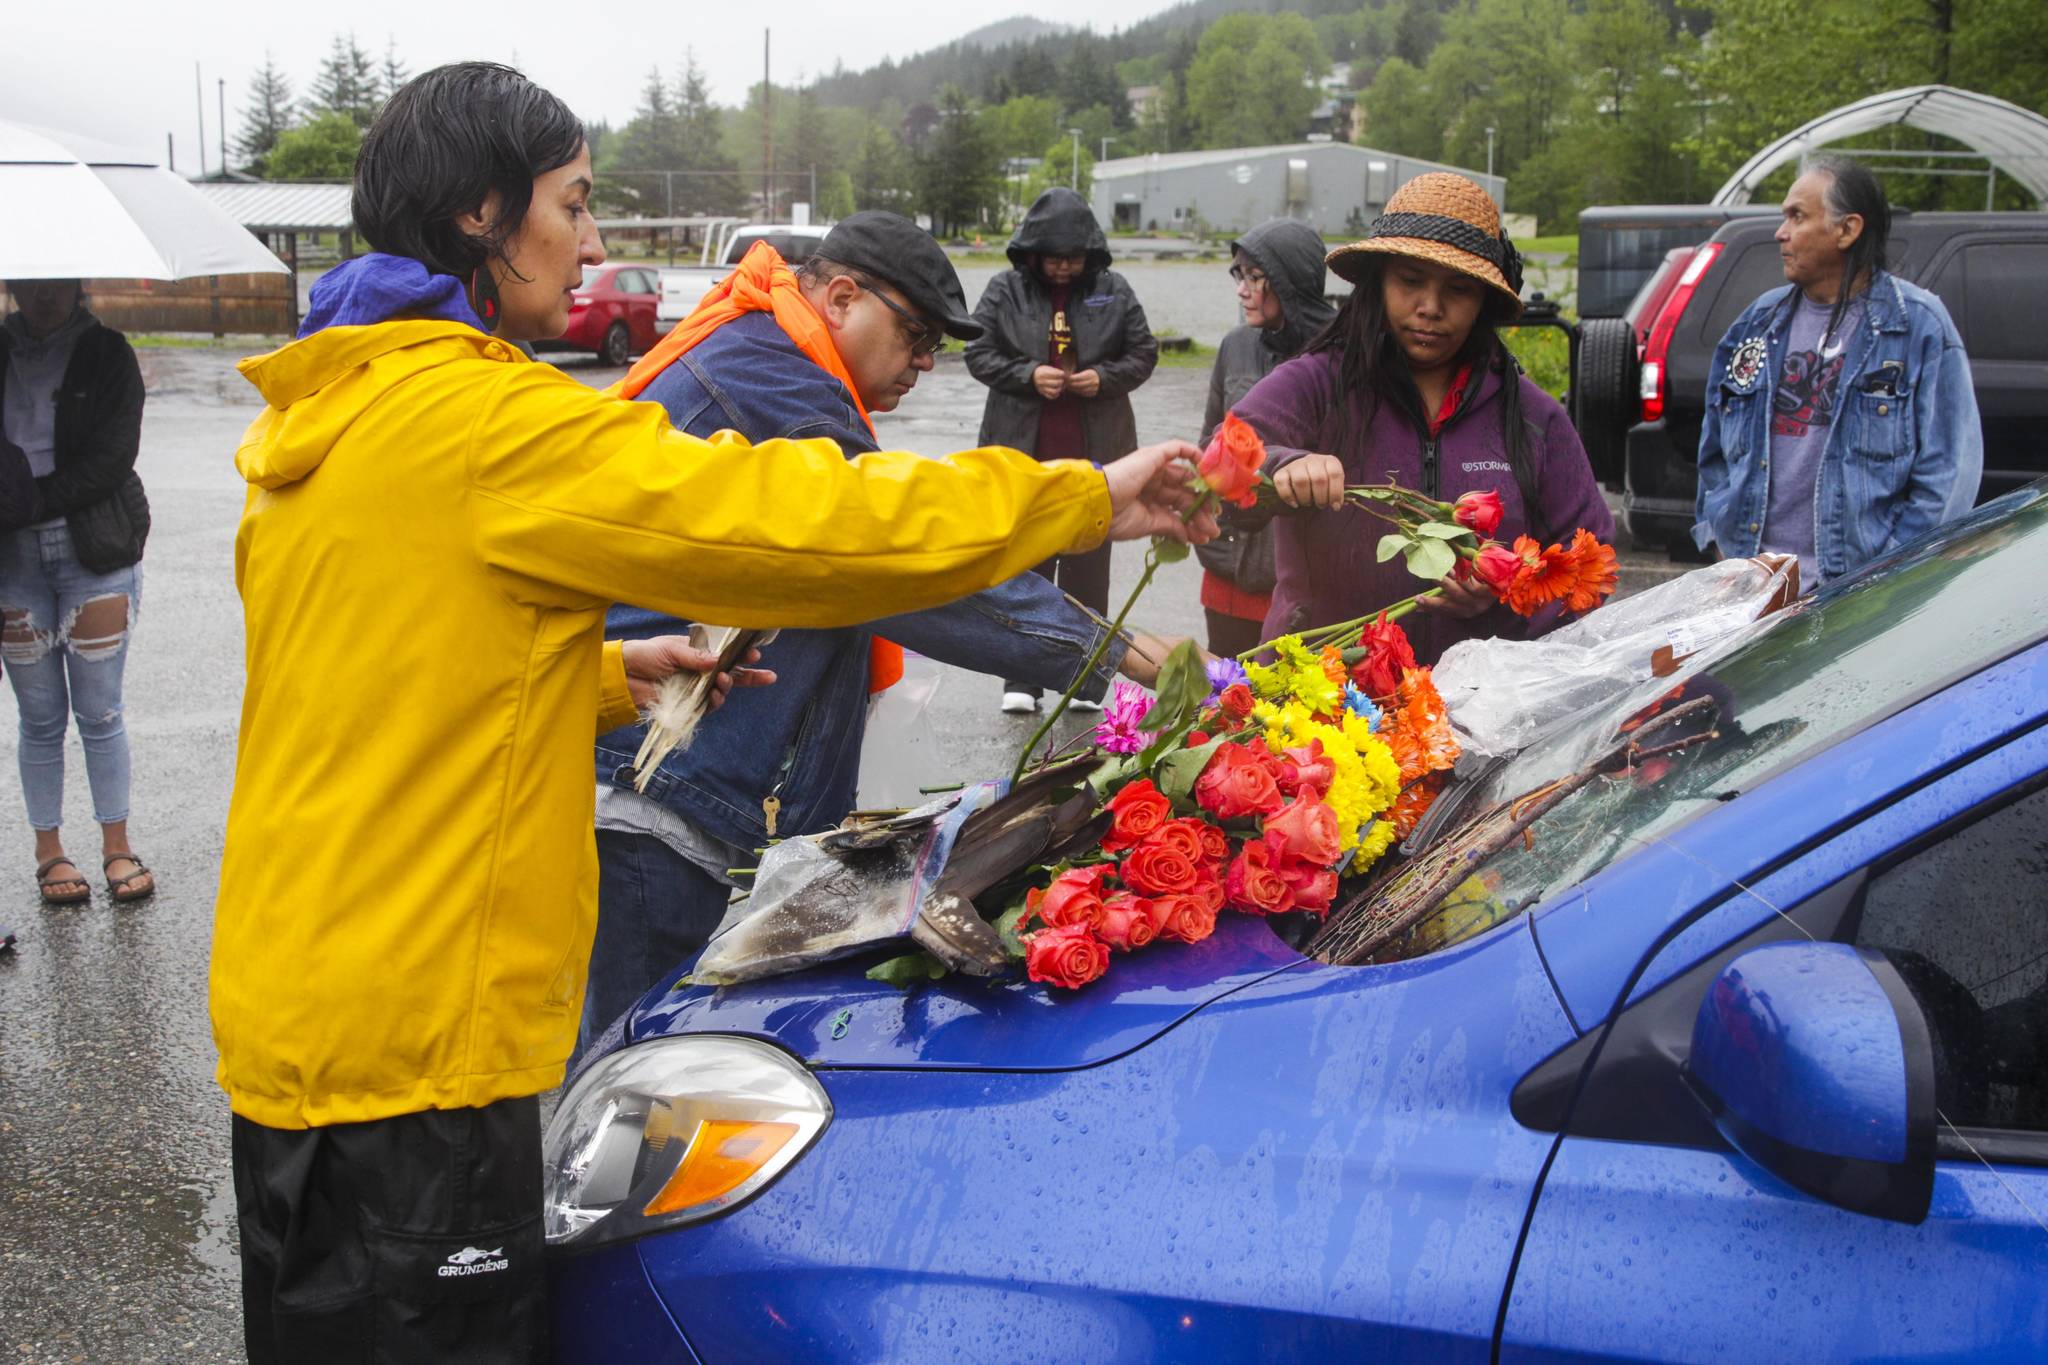 Juneau residents gathered outside the Juneau Montessori School, the last surviving school from the era of residential schools in the area, to honor the 215 dead Indigenous children found at a residential school in Canada, on May 31, 2021. (Michael S. Lockett / Juneau Empire)